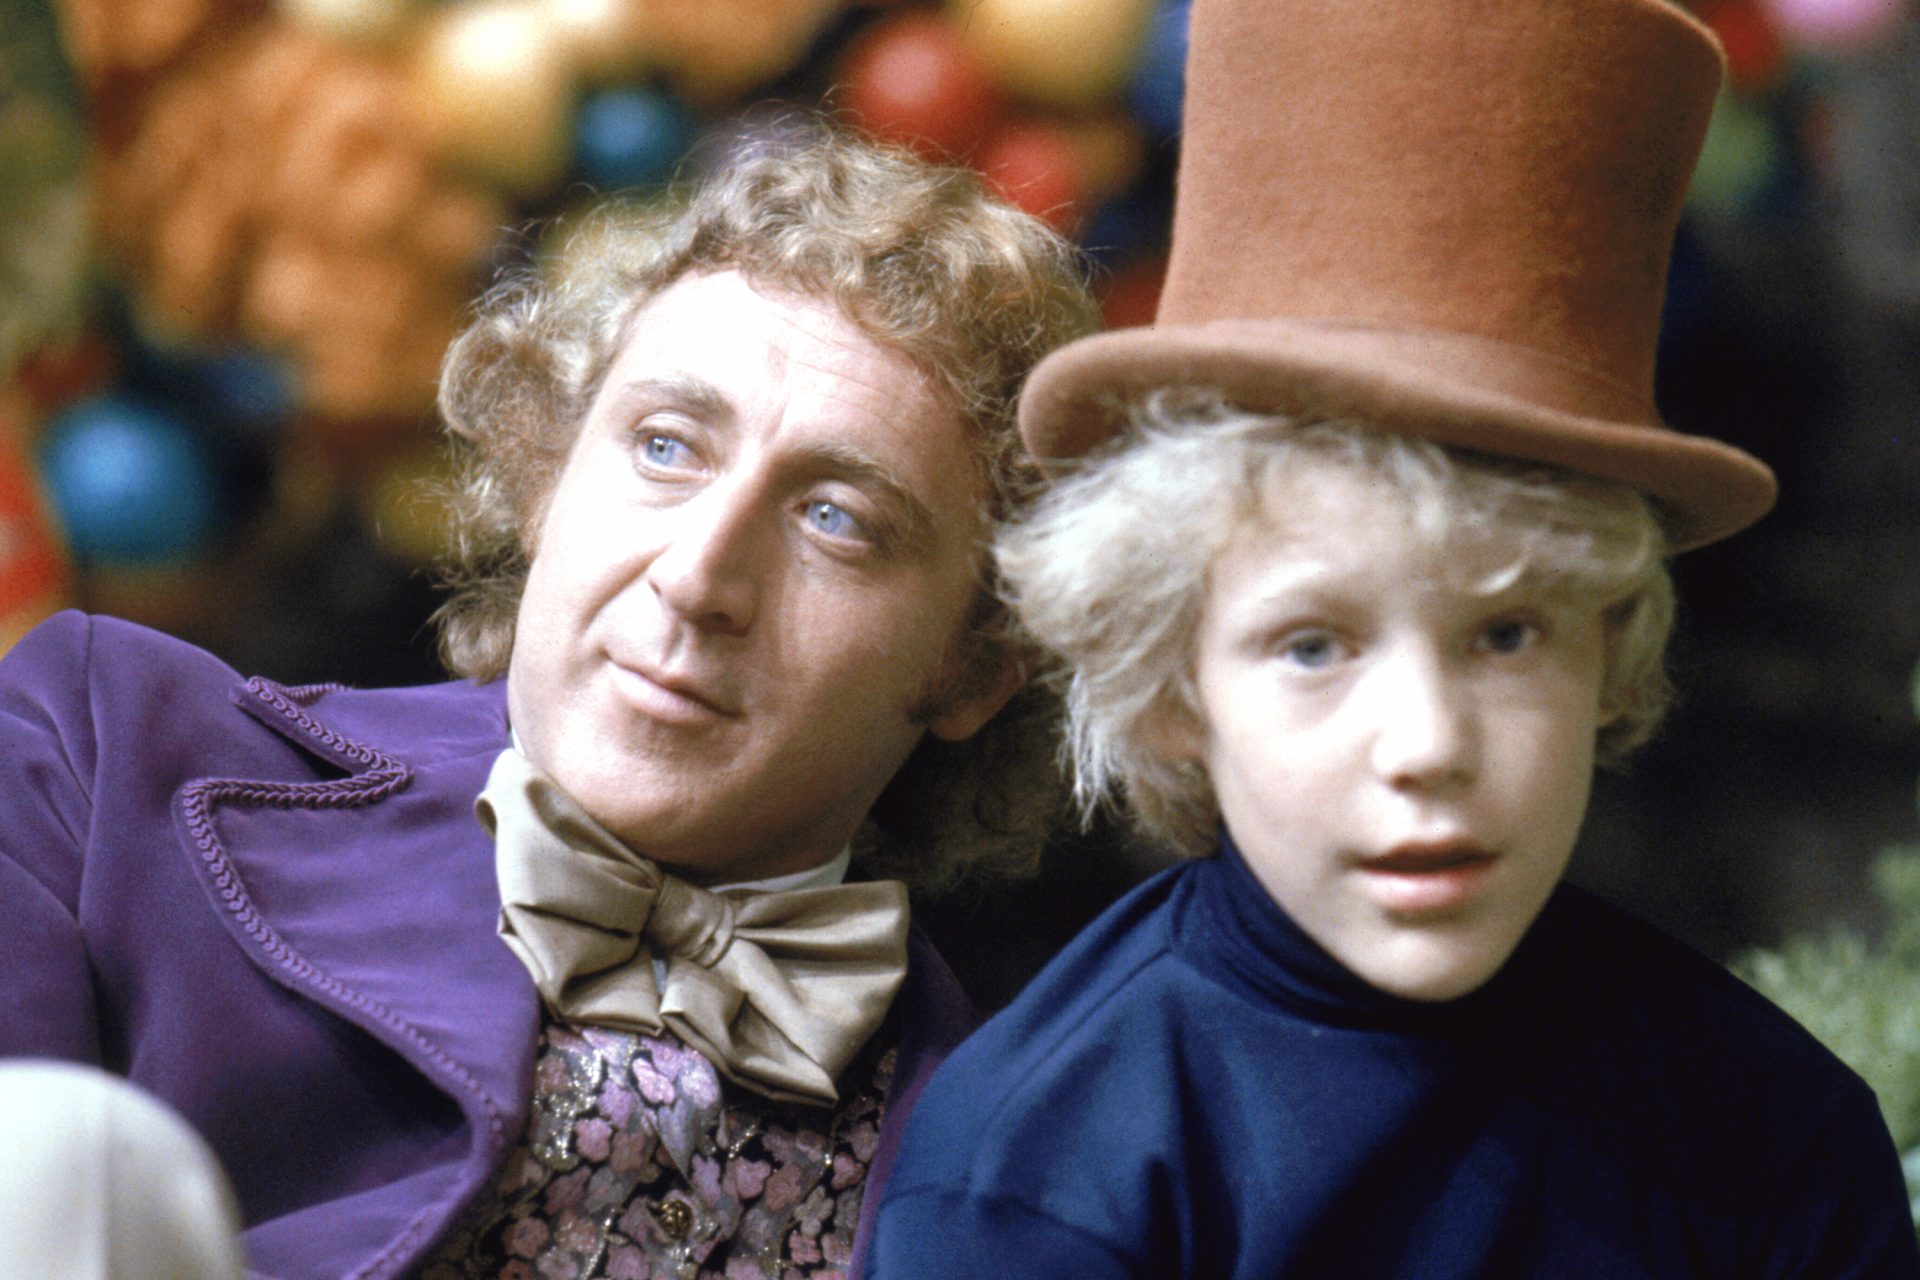 Willy Wonka returns to the big screen on December 15th